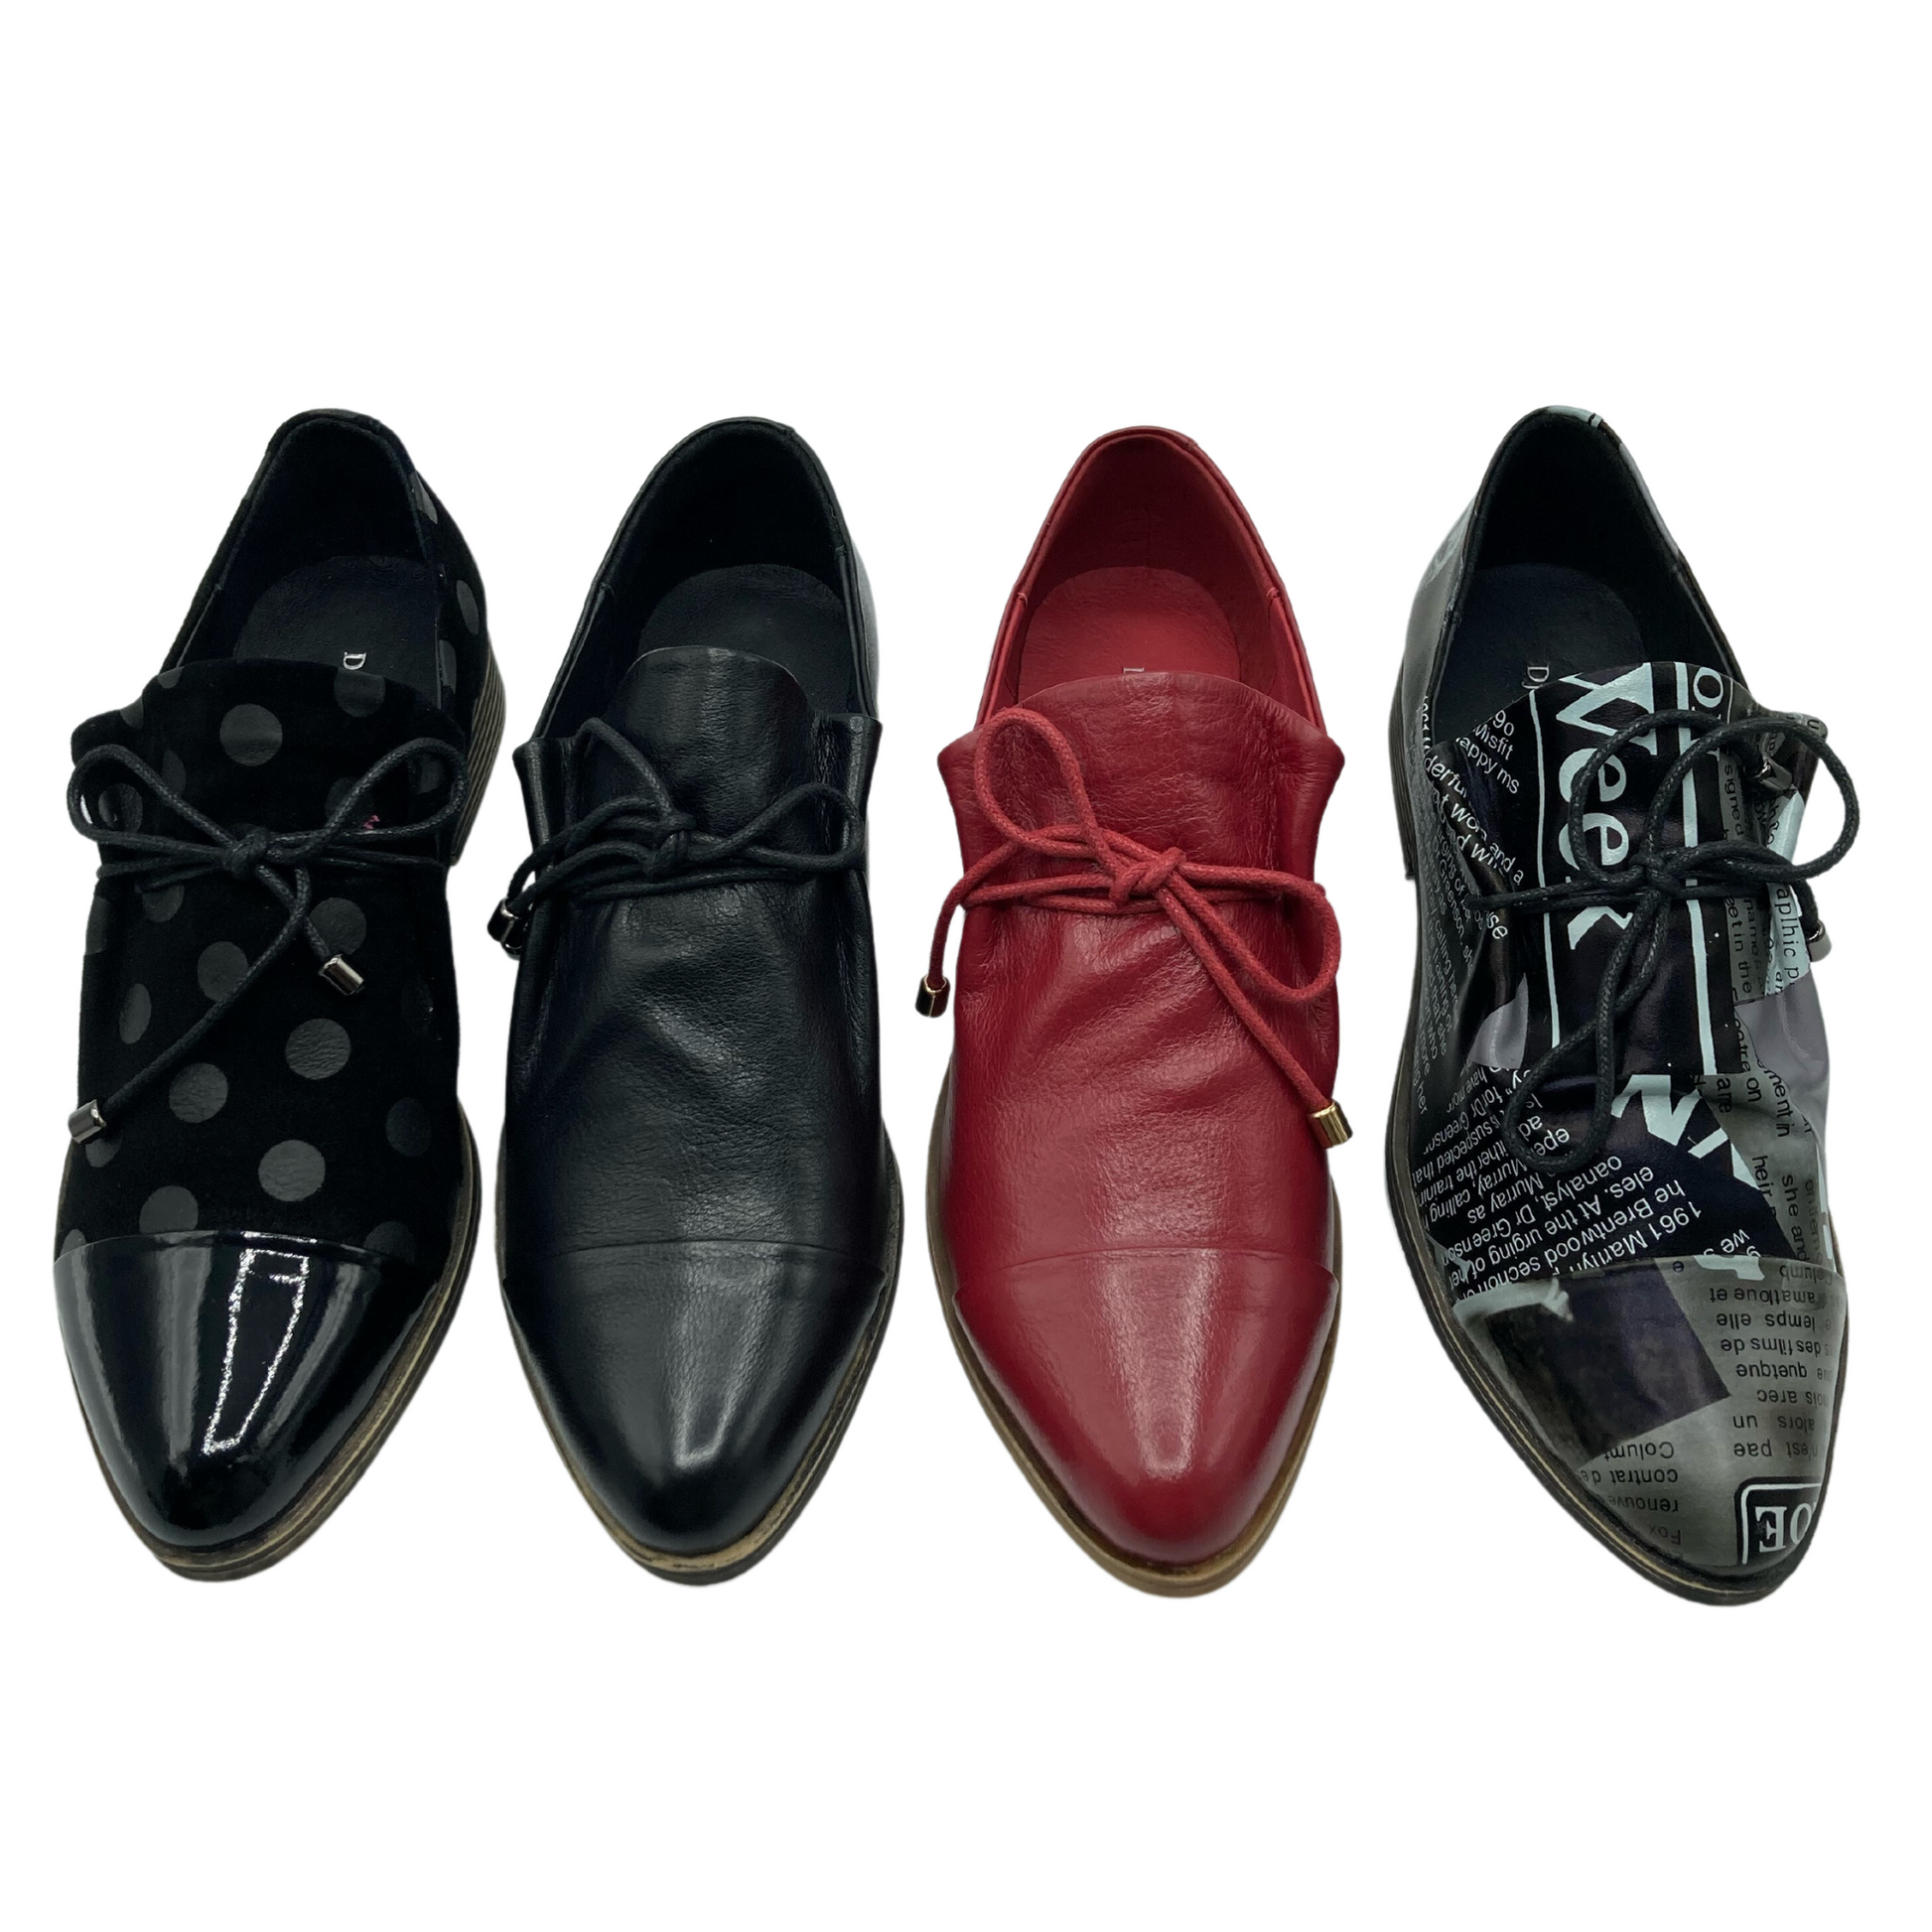 View of 4 shoes side by side. Far left is black with shiny black polka-dots and toe cap, next is all black, second from the right is red and far right is a grey and black newspaper print